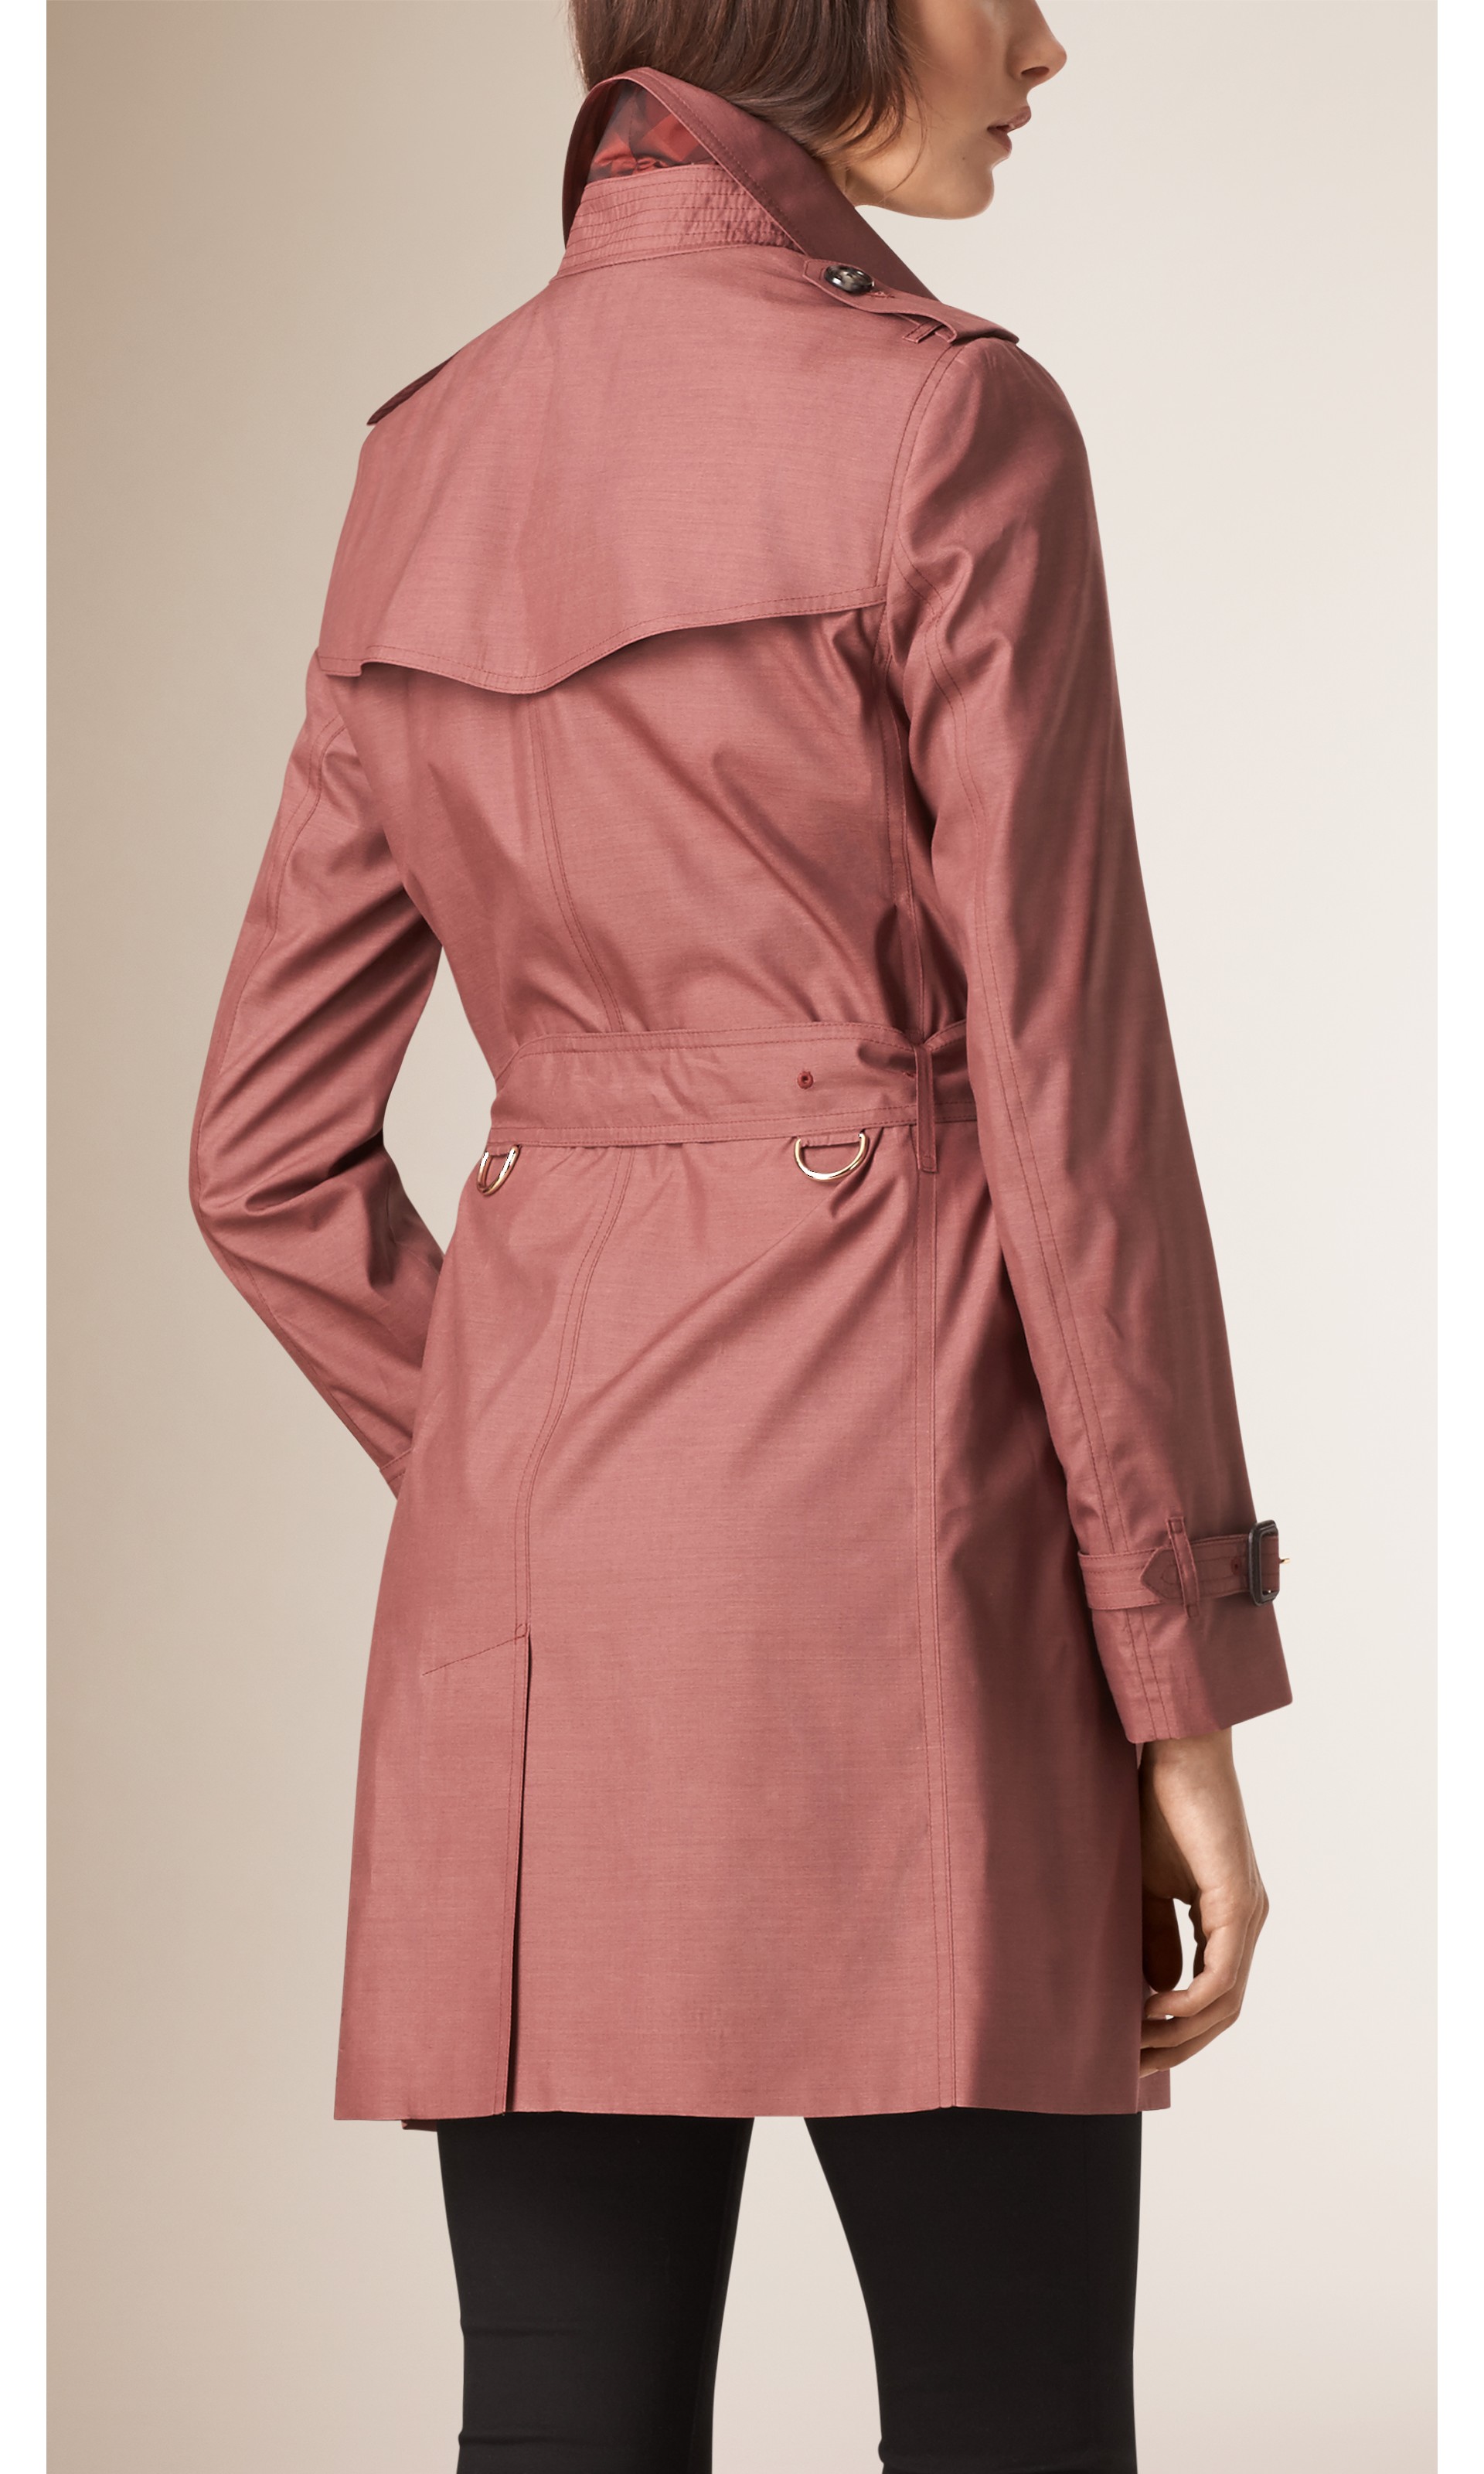 Silk Wool Trench Coat in Pale Elderberry - Women | Burberry United States